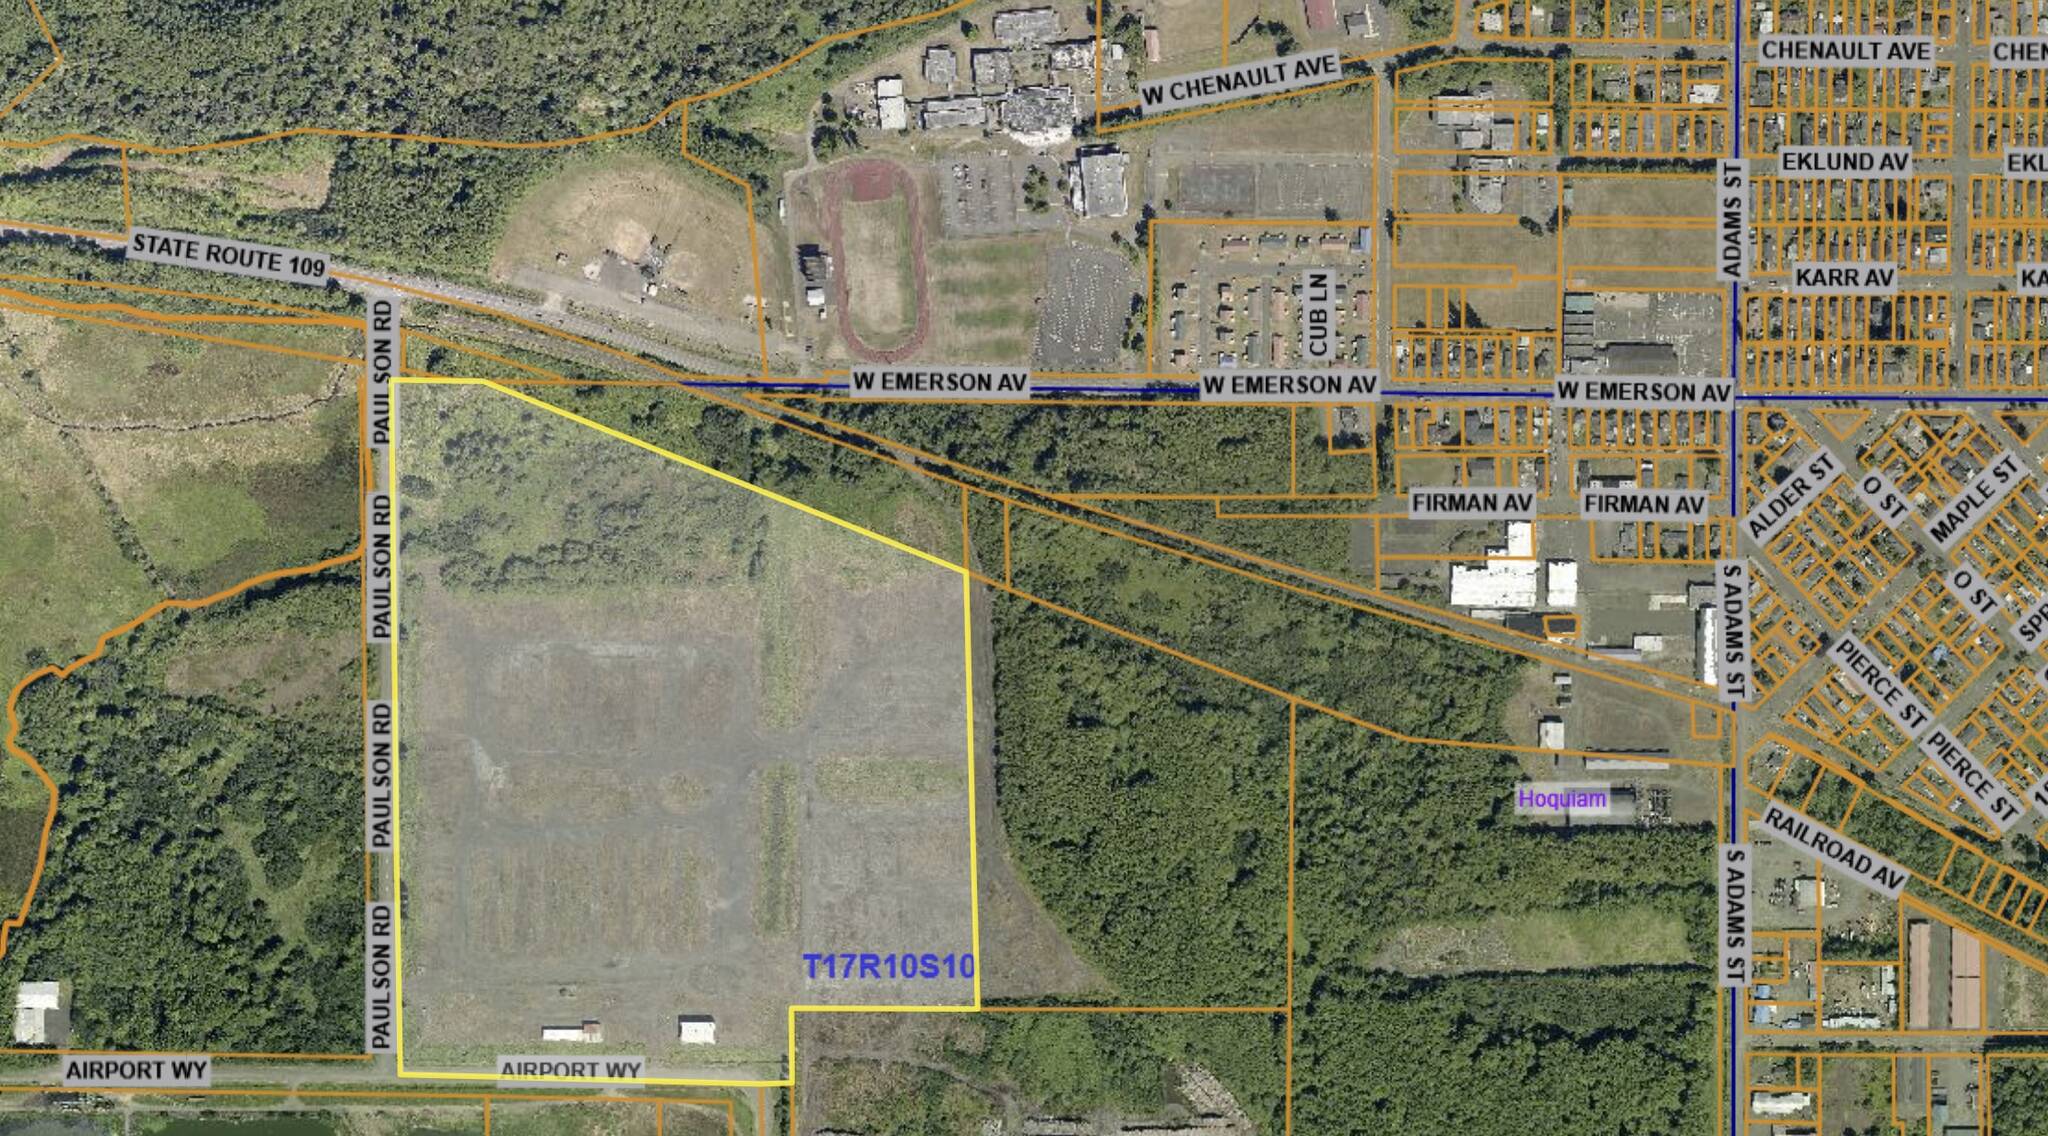 Grays Harbor County Assessor
A wood pellet manufacturing facility proposed for 411 Moon Island Road in Hoquiam, outlined in yellow, received approval from the Olympic Region Clean Air Agency five months after a public hearing raised a number of concerns over the proposal.